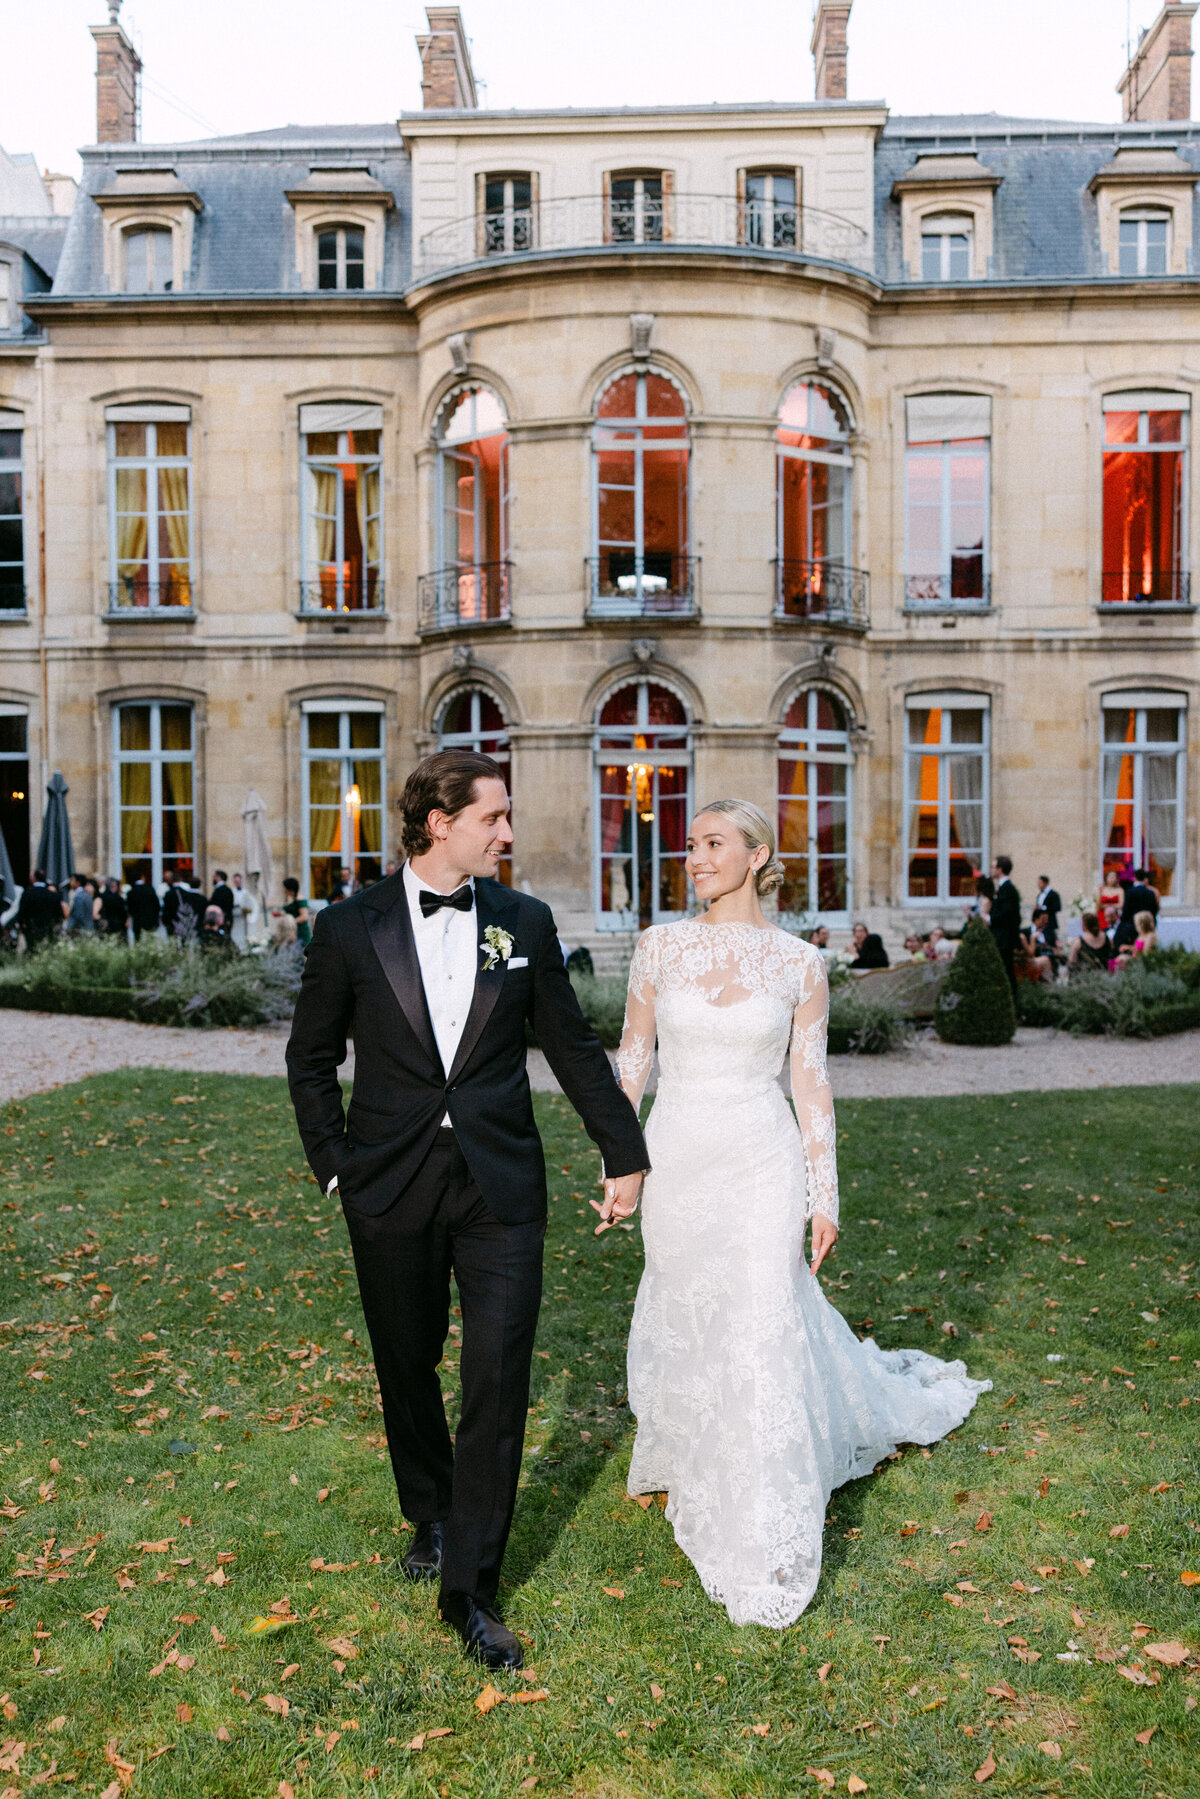 Jennifer Fox Weddings English speaking wedding planning & design agency in France crafting refined and bespoke weddings and celebrations Provence, Paris and destination wd710